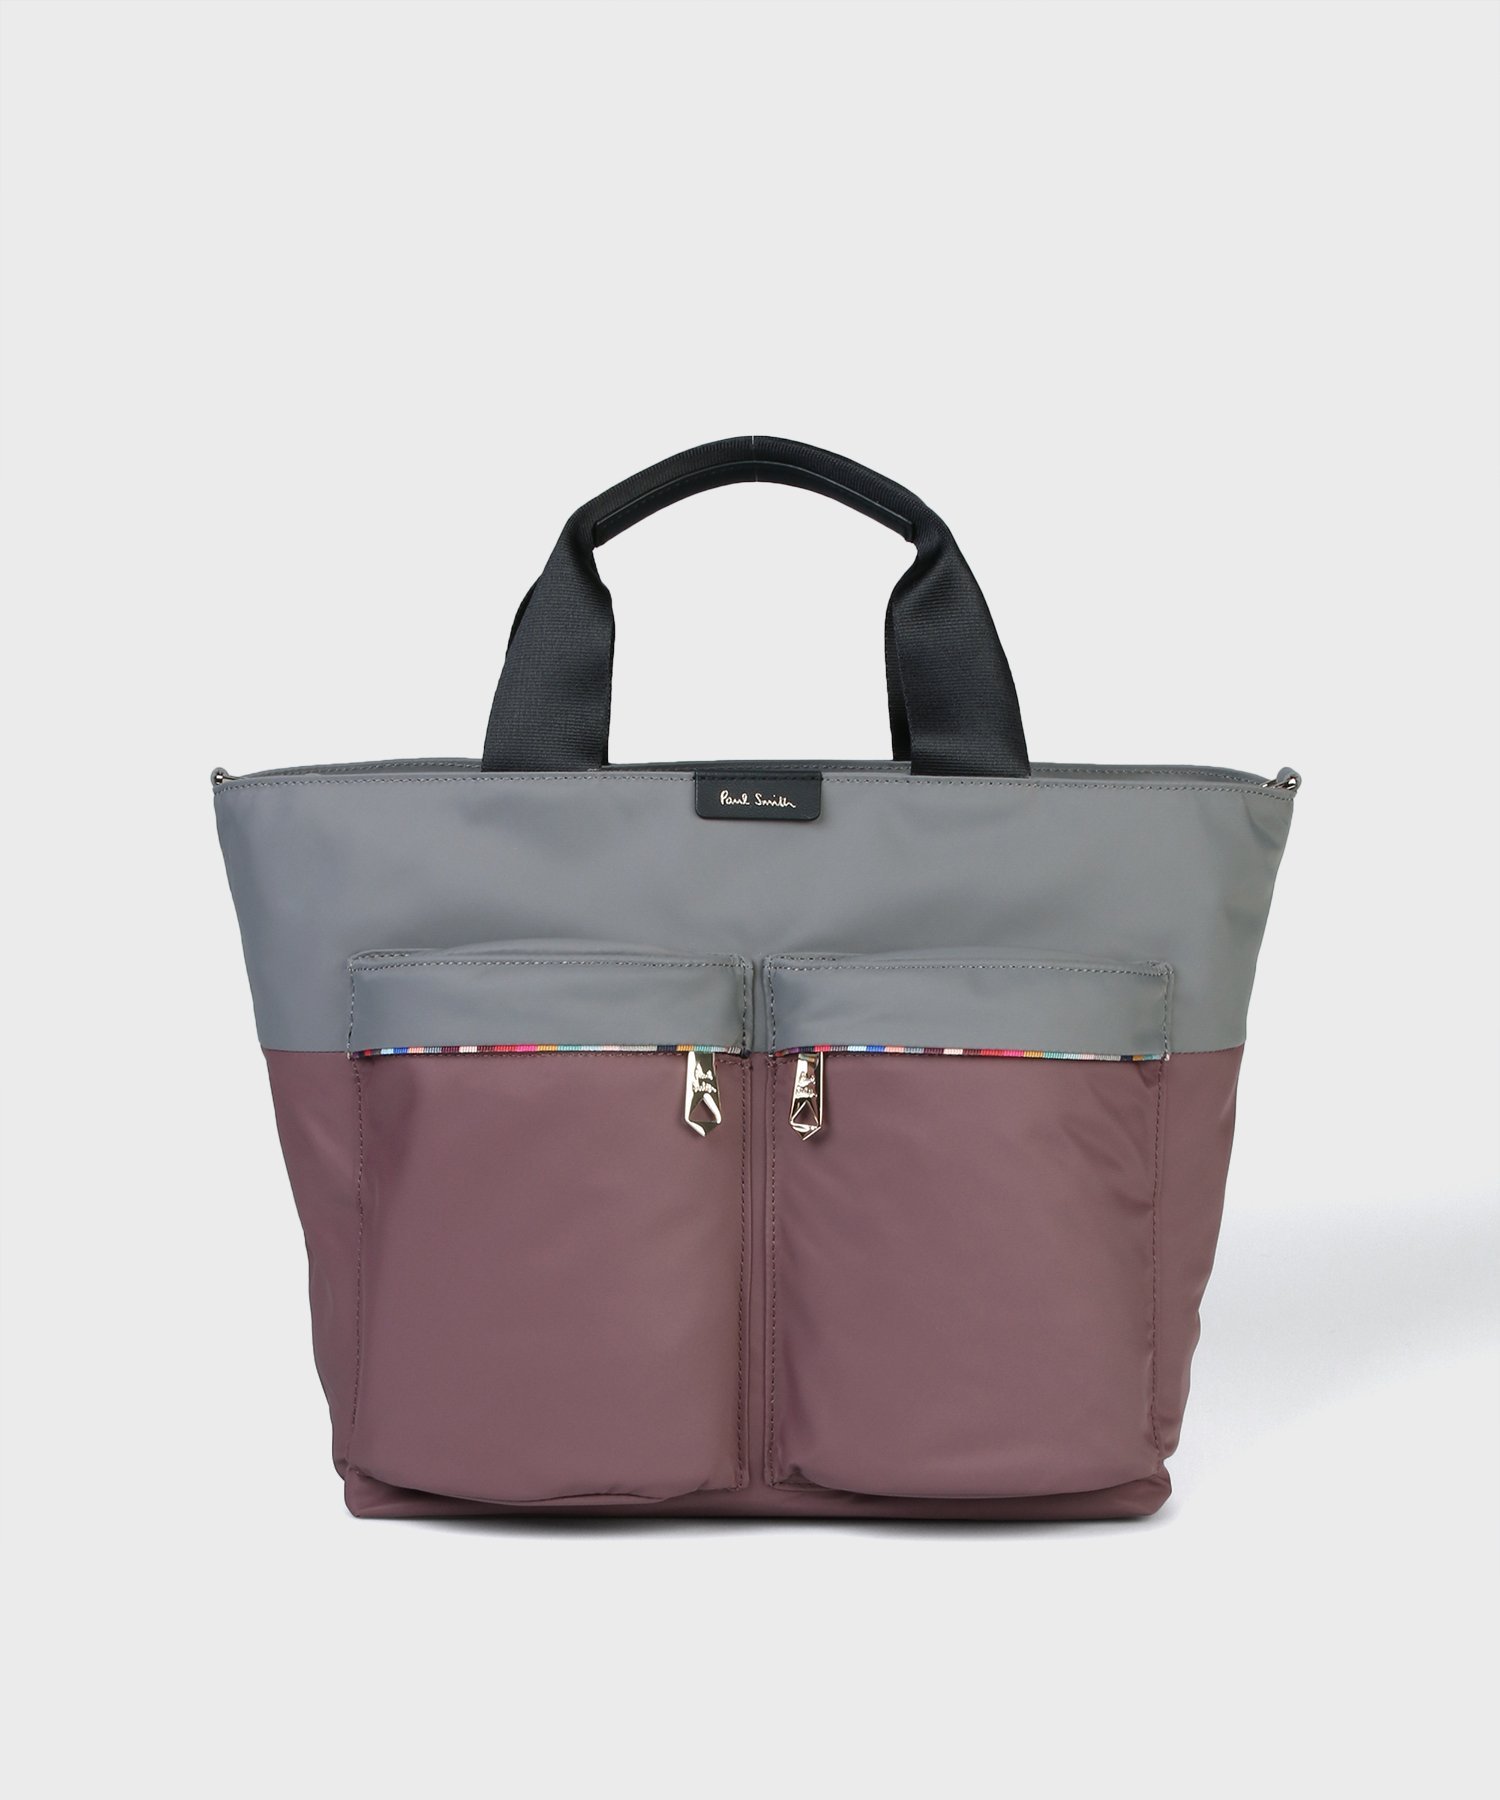 【SALE／40%OFF】Paul Smith 【公式】バイカラーブロック トートバッグ ポール・スミス　アウトレット バッグ トートバッグ ピンク【送料無料】